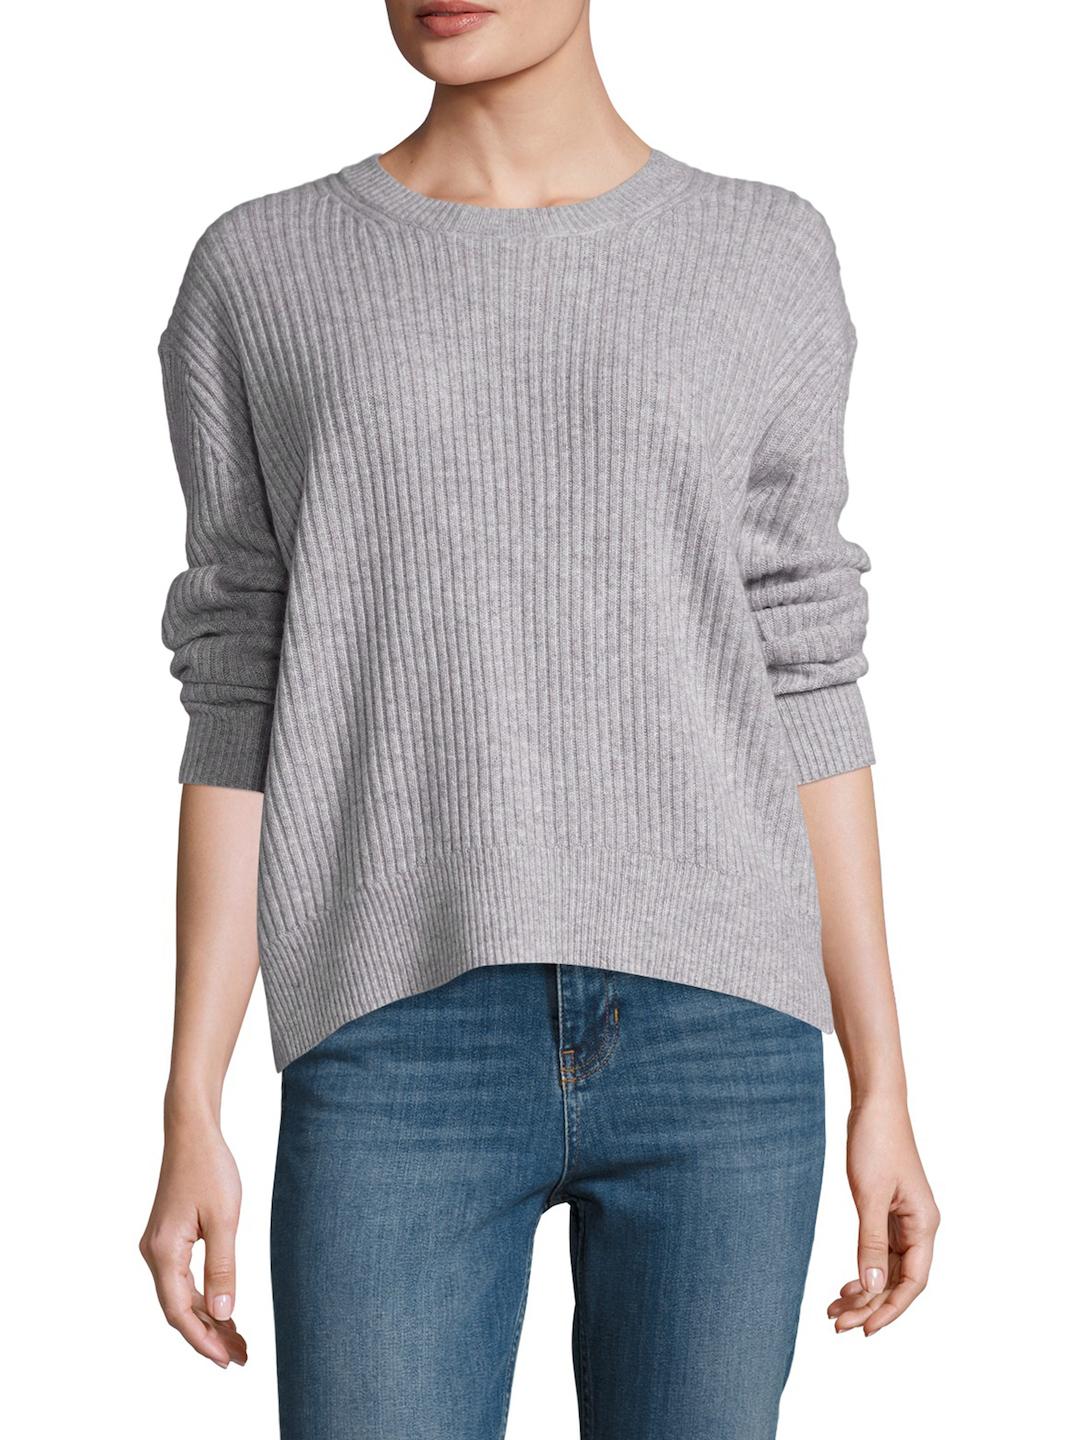 NAKEDCASHMERE Campbell Cashmere Ribbed Sweater in Gray - Lyst